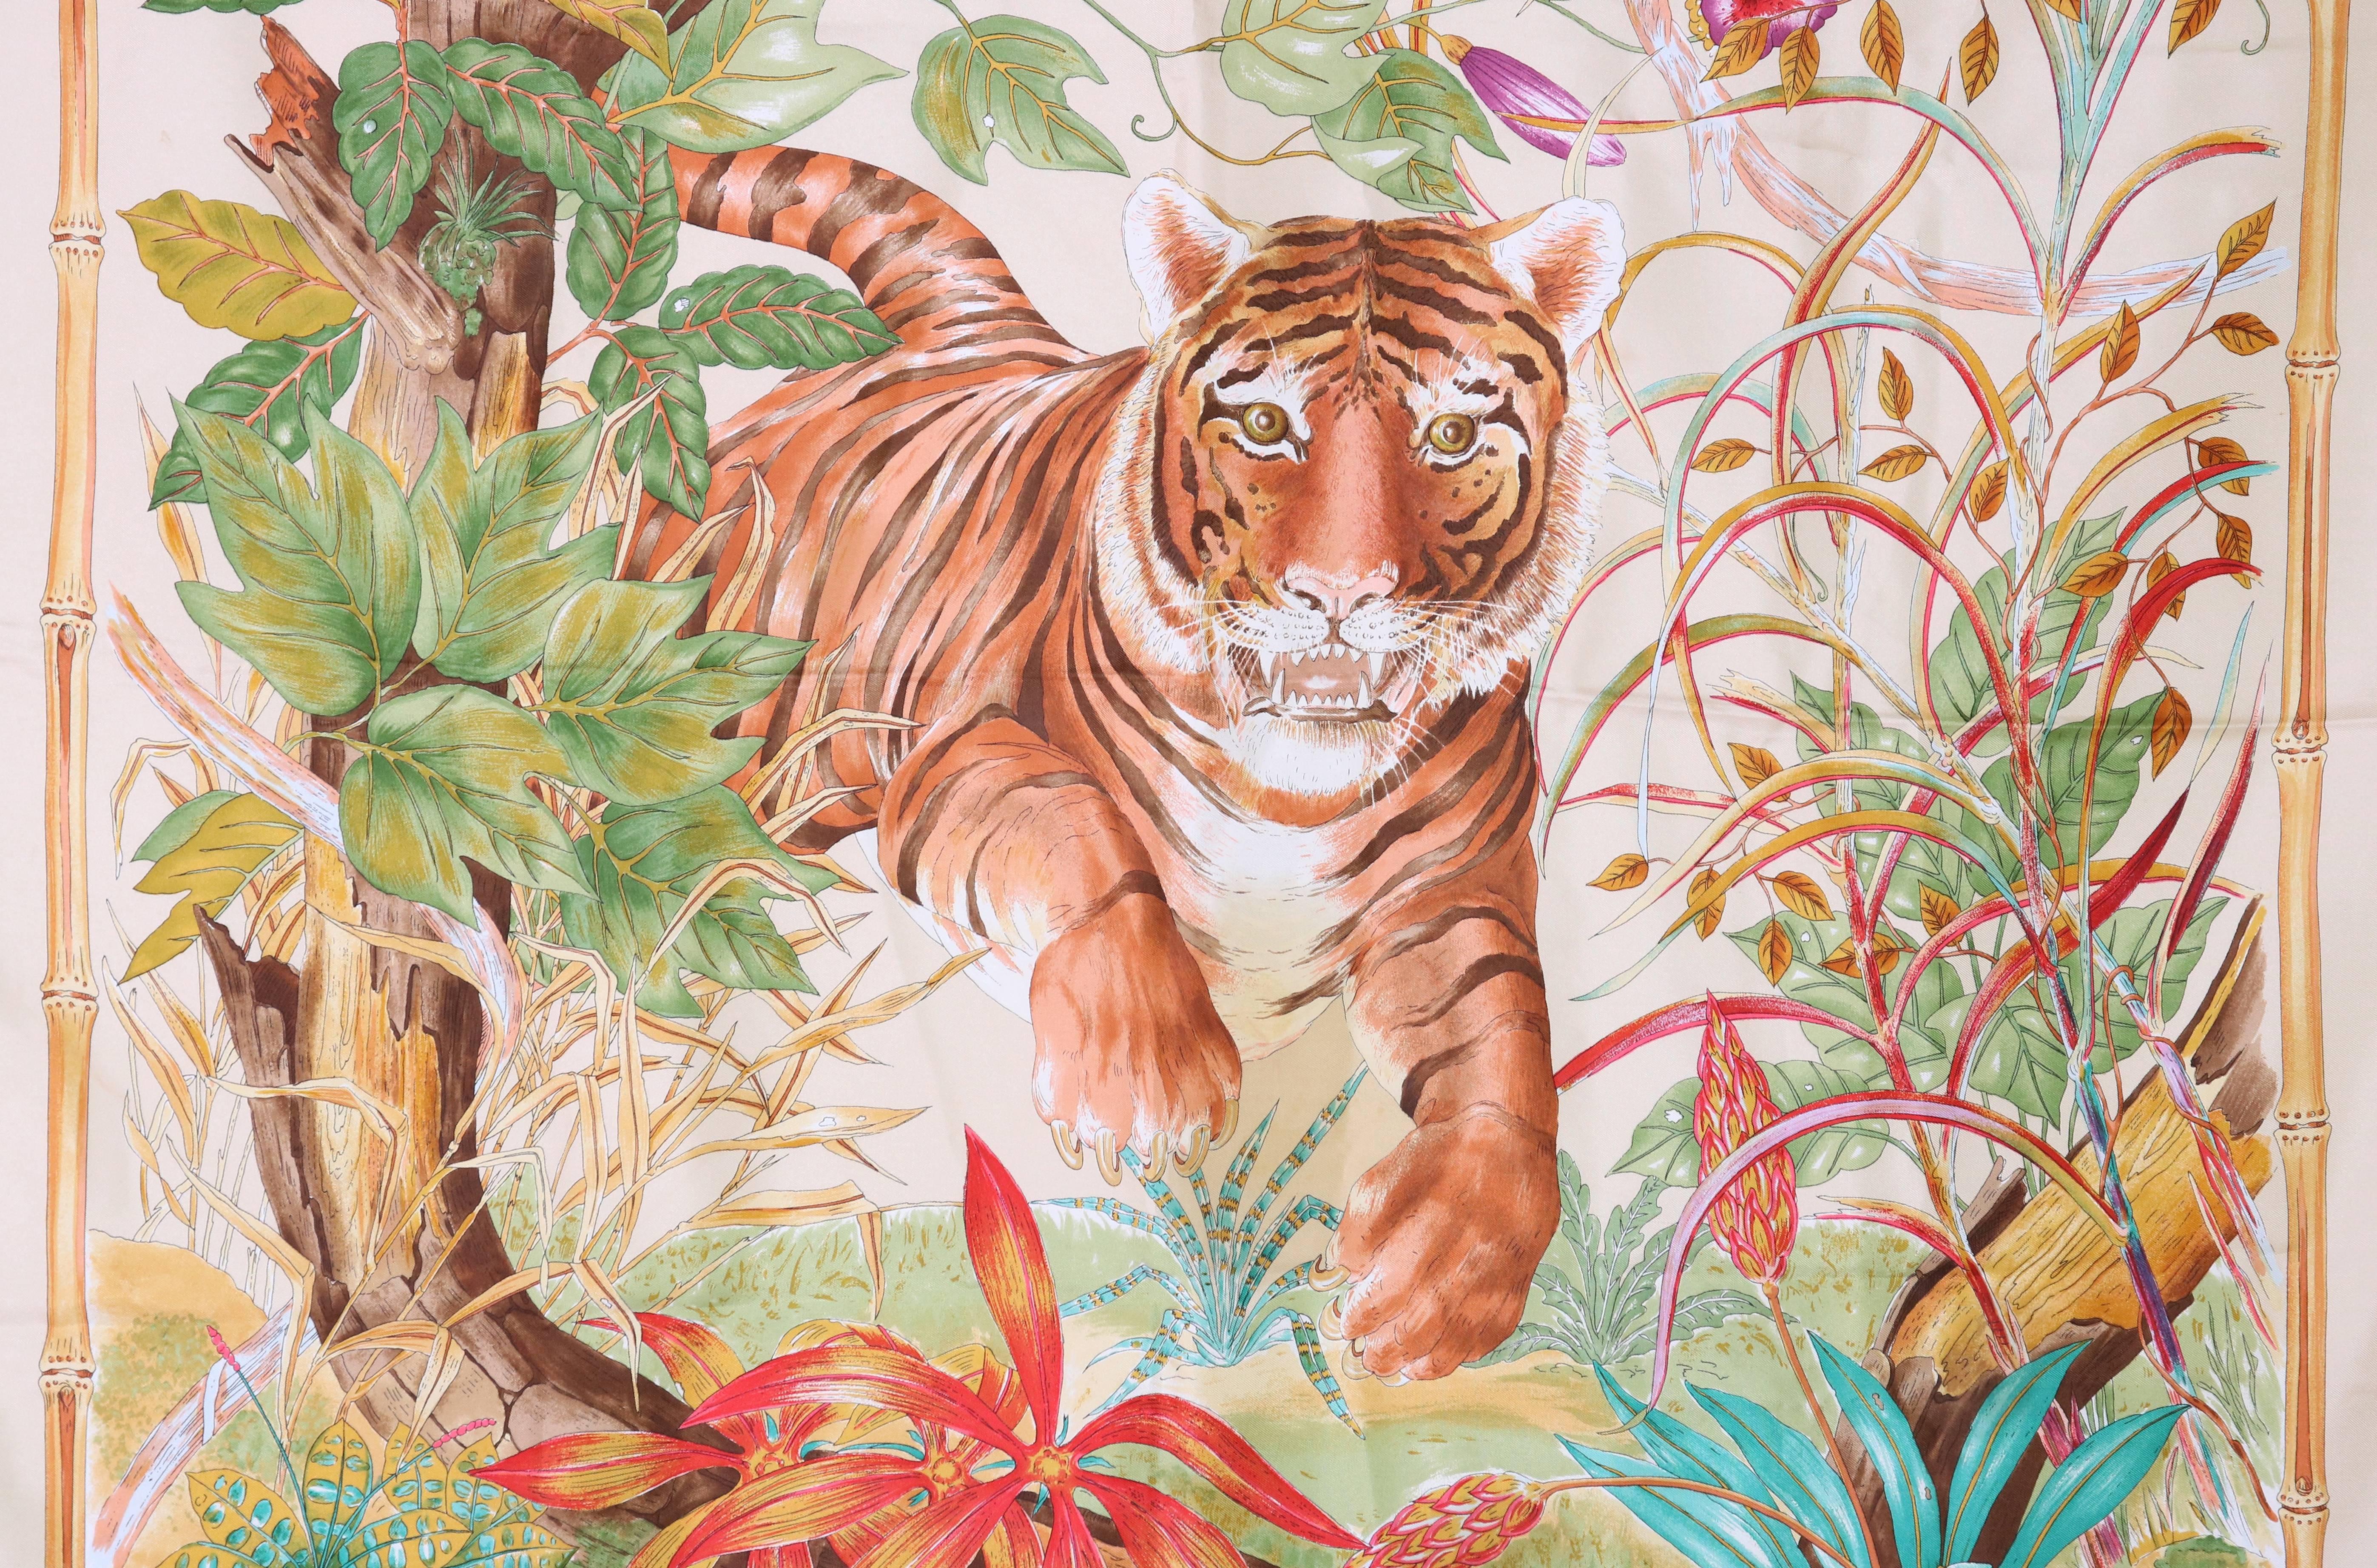 1970's Gucci silk scarf w/a tiger in the jungle framed by a bamboo border. Gucci logo in upper left and lower right corner. In very good condition with a tiny light pink mark at one corner. Labeled 